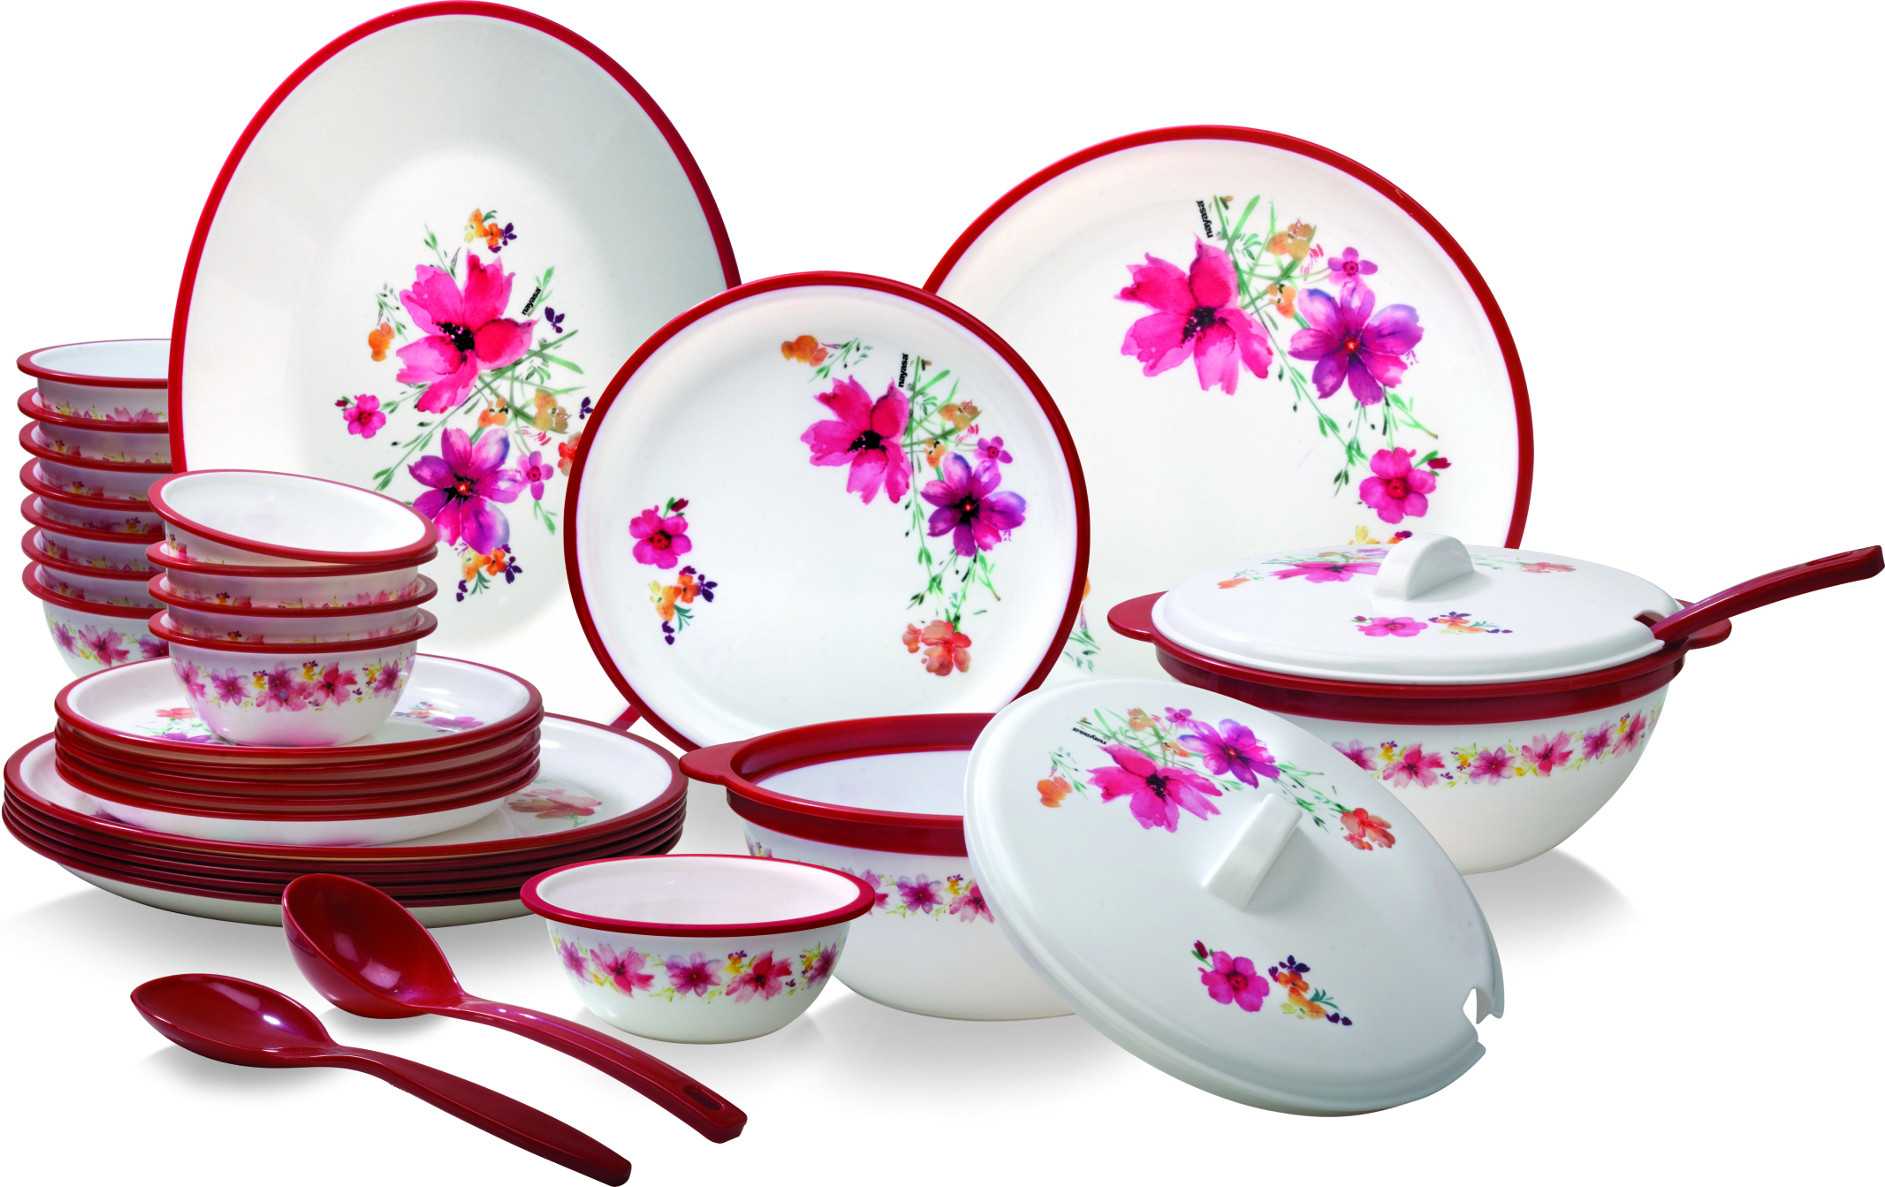 Discounts on Crockery, Kitchenware Gift Items